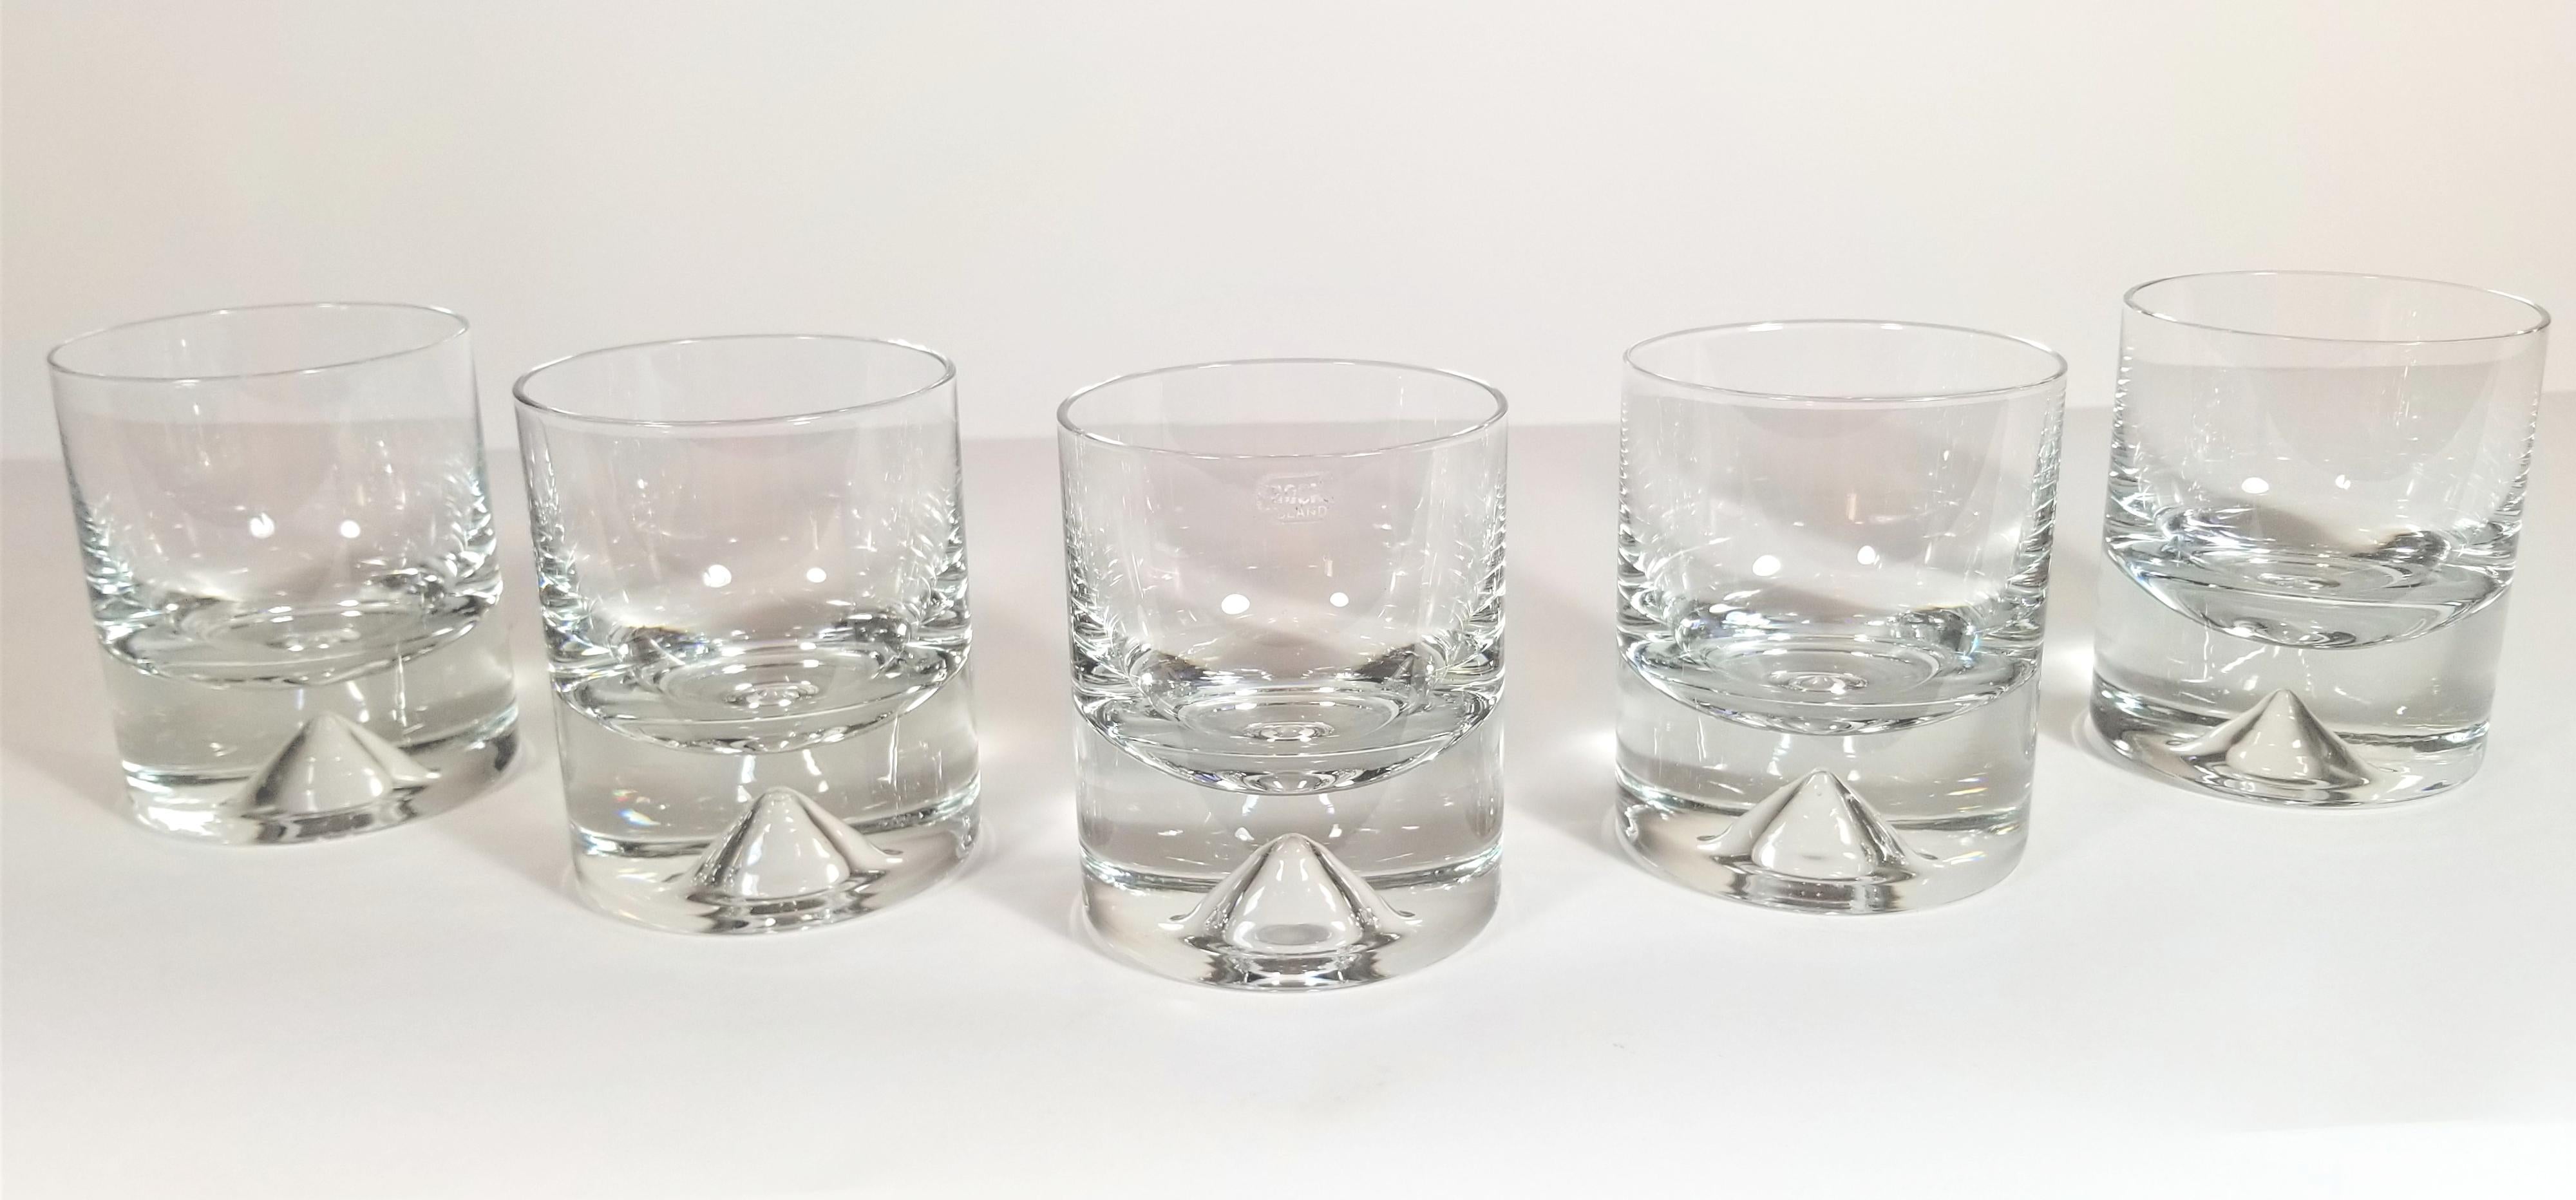 On Sale 6 KROSNO 6oz Hand Blown Juice Glasses Imported From Poland 